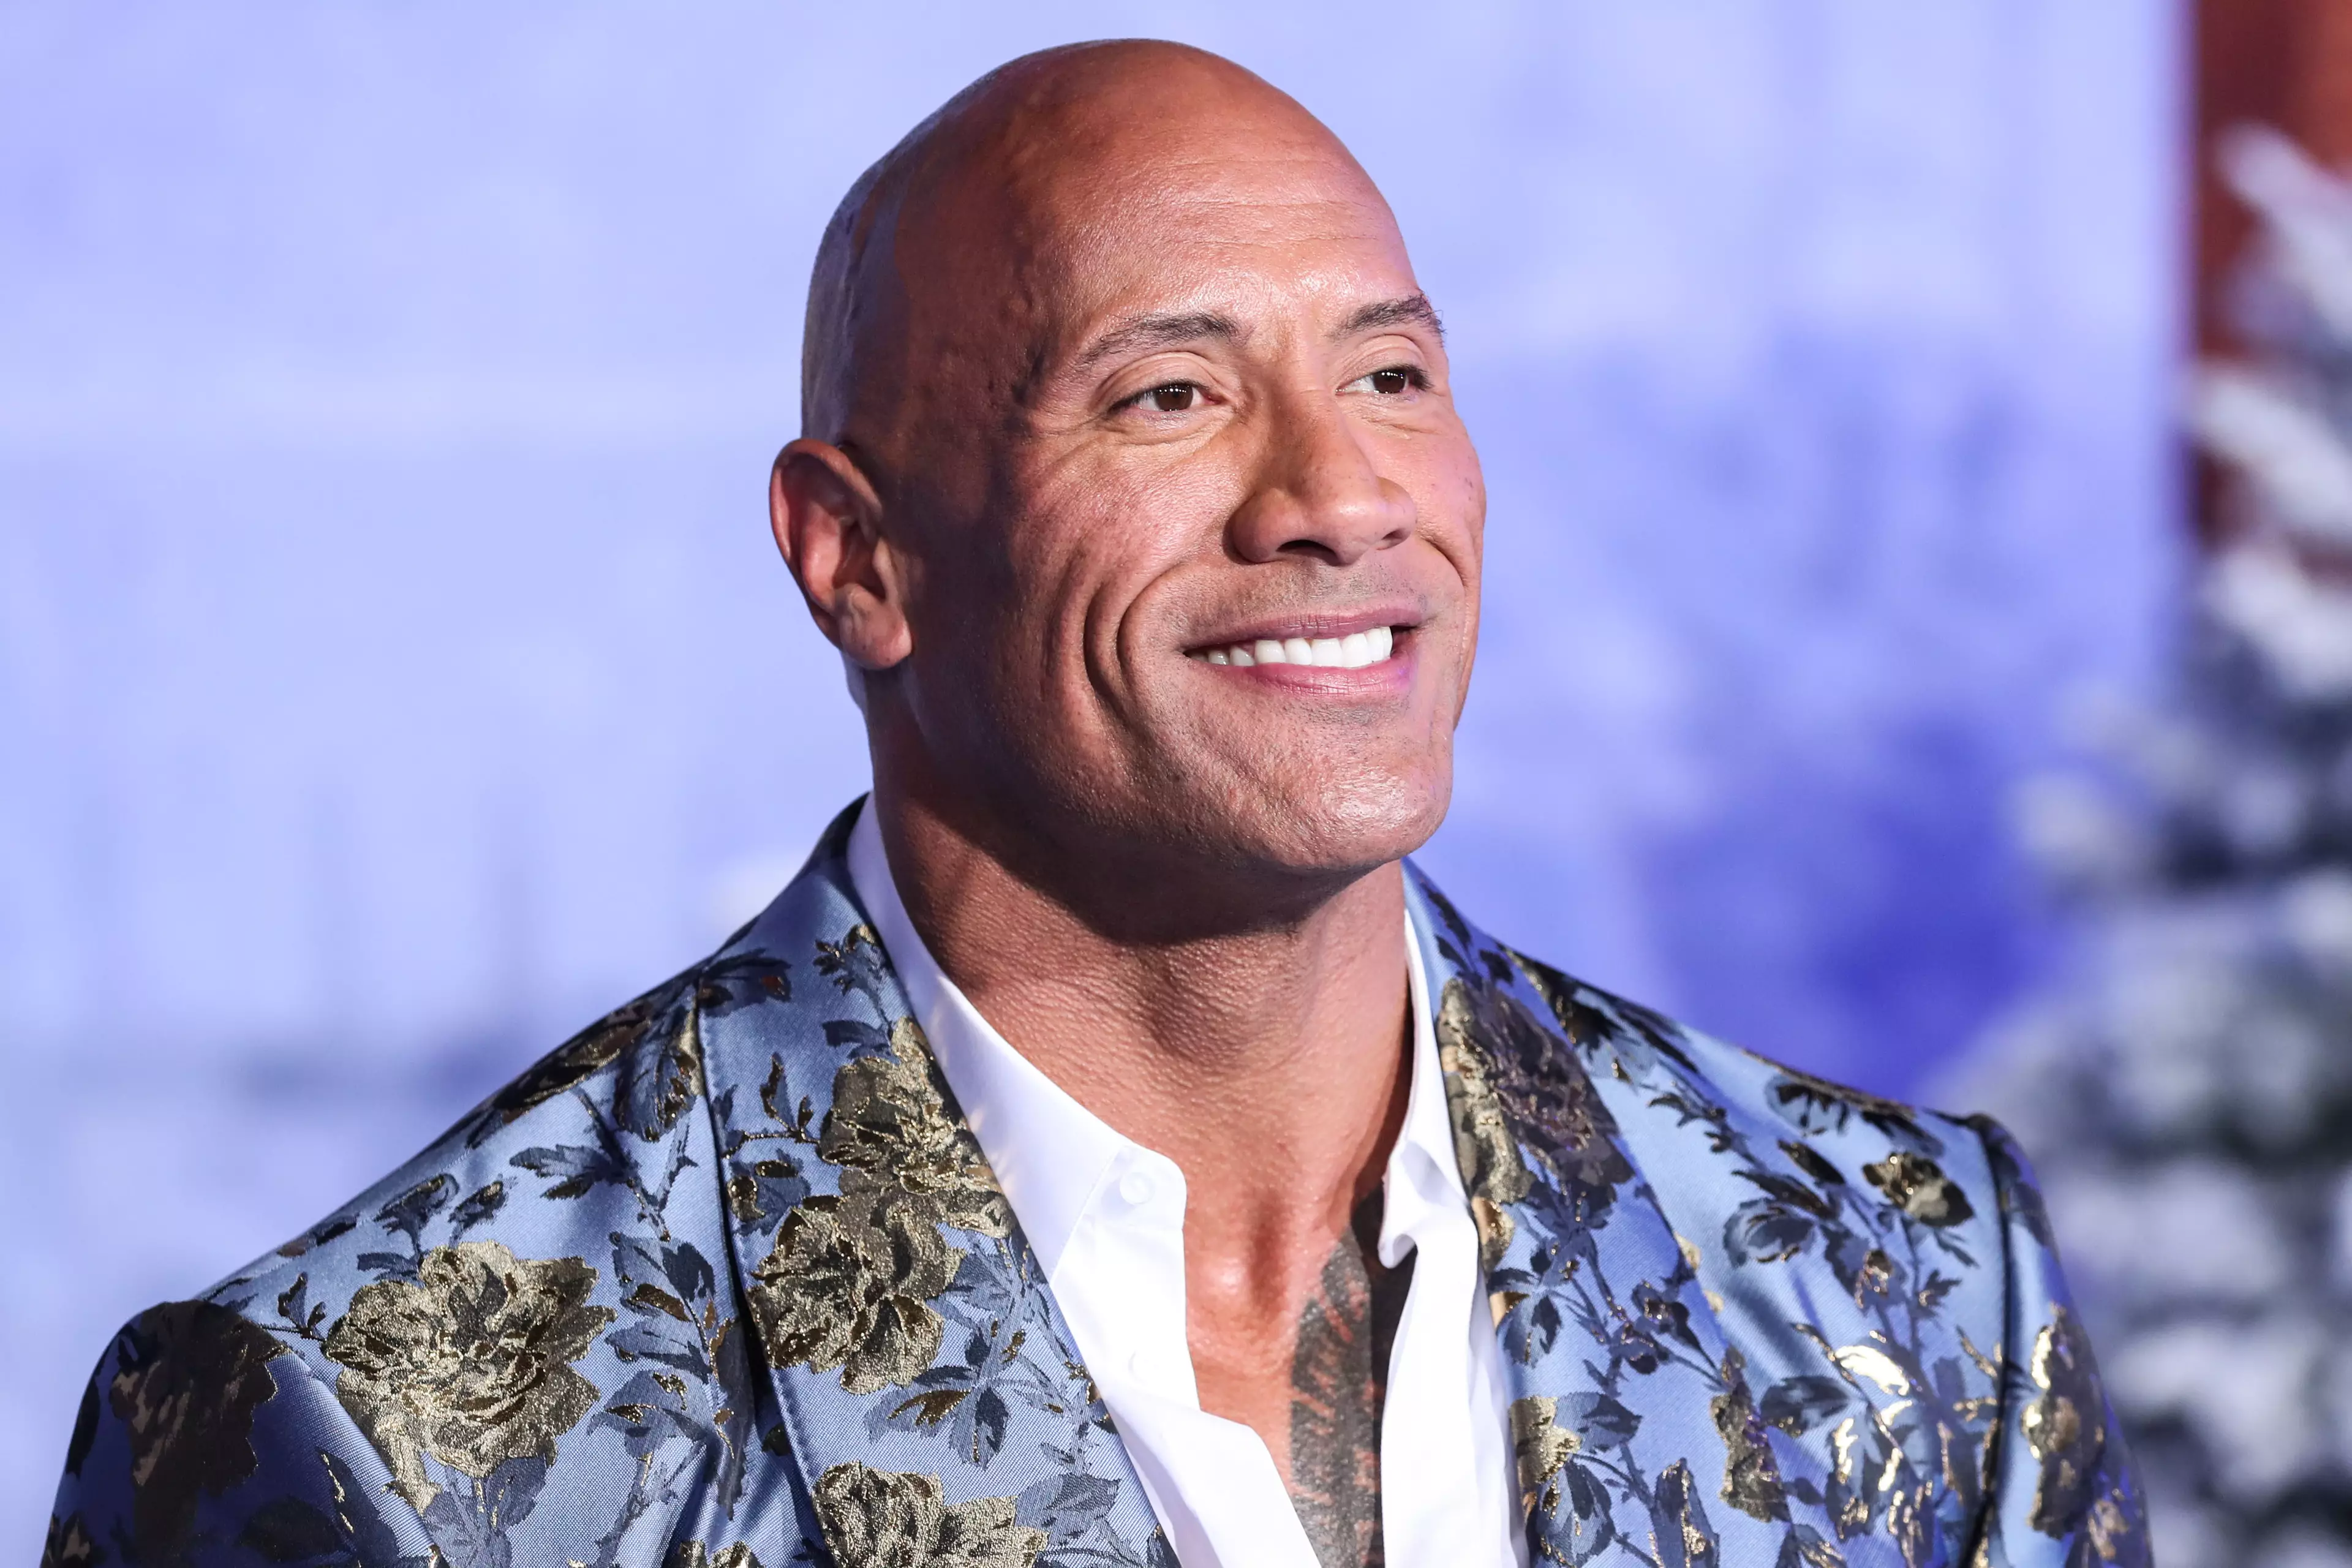 The Rock does OK for himself, to be fair.